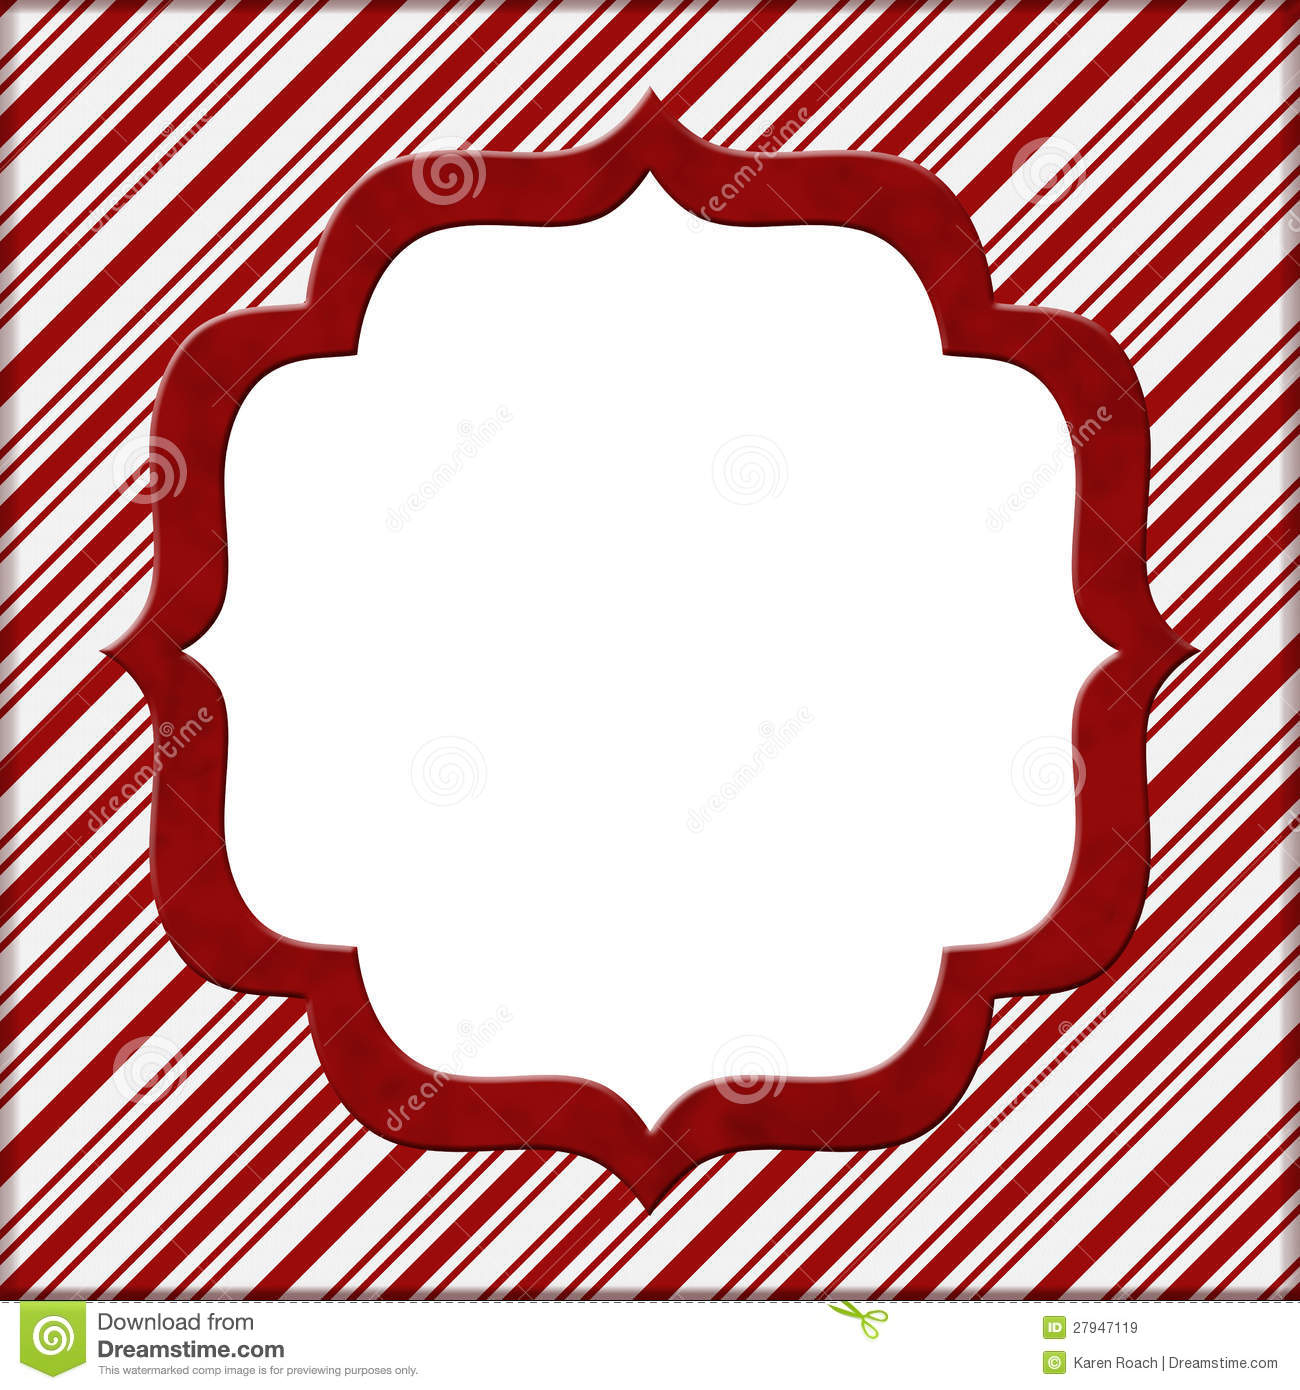 Christmas Candy Cane Striped Background Royalty Free Stock Images